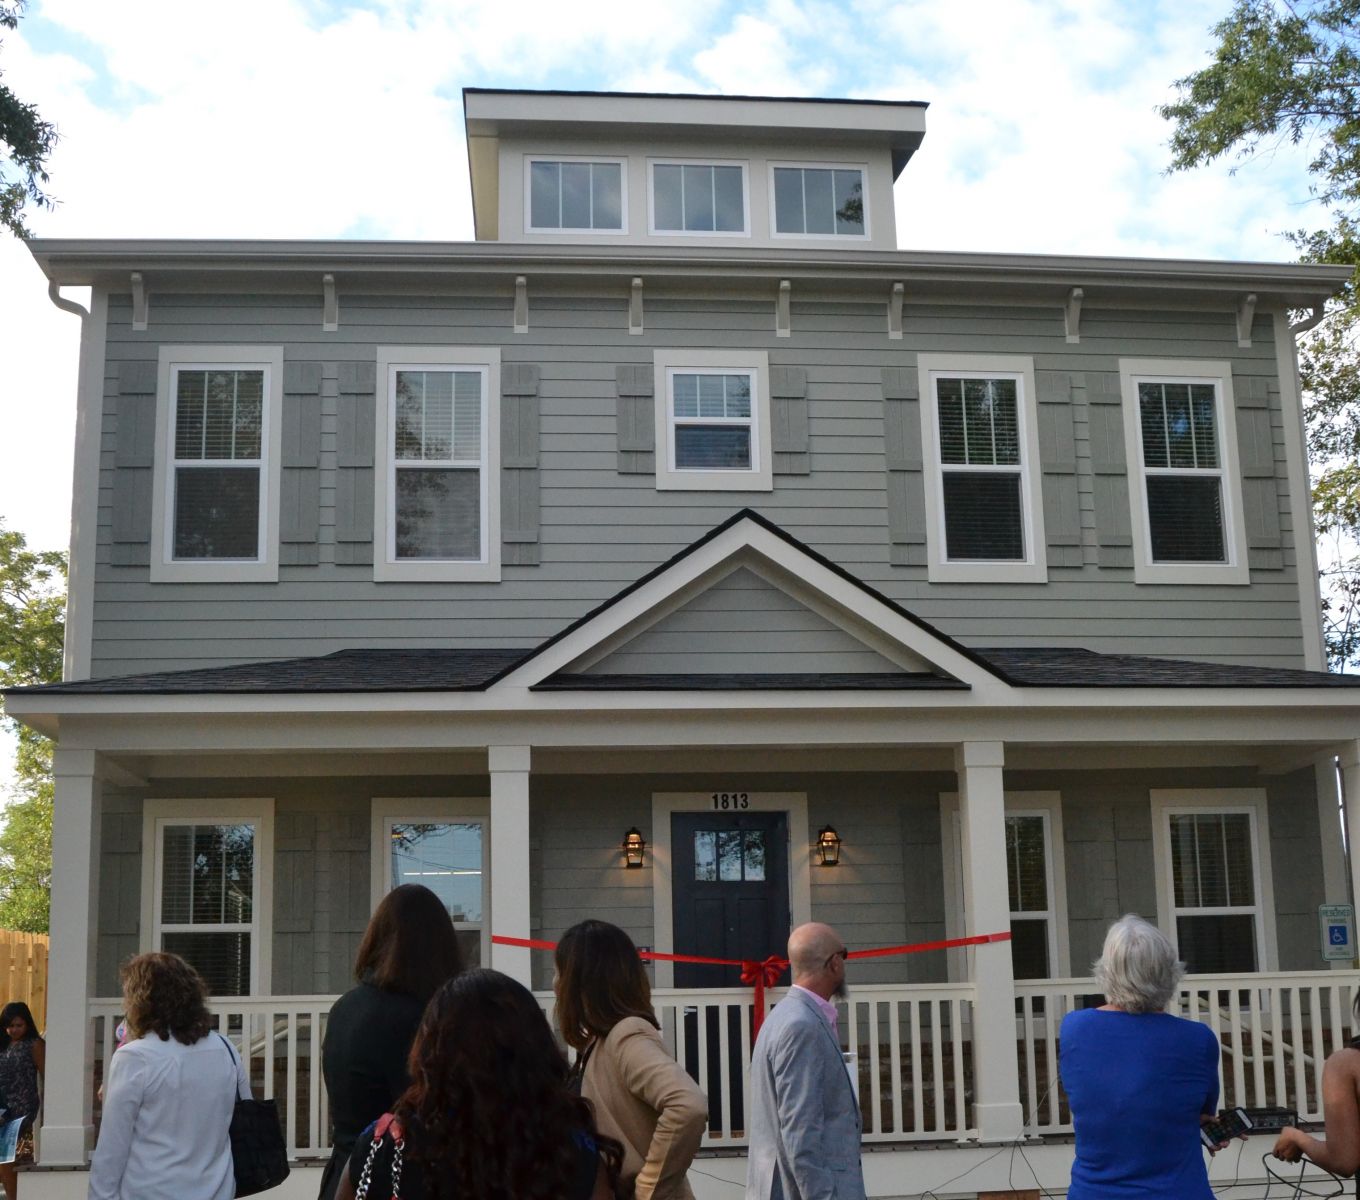 A new house at 1813 Washington St. will serve as transition housing for 10 area young men experiencing or at risk of homelessness. (Photo/Travis Boland)